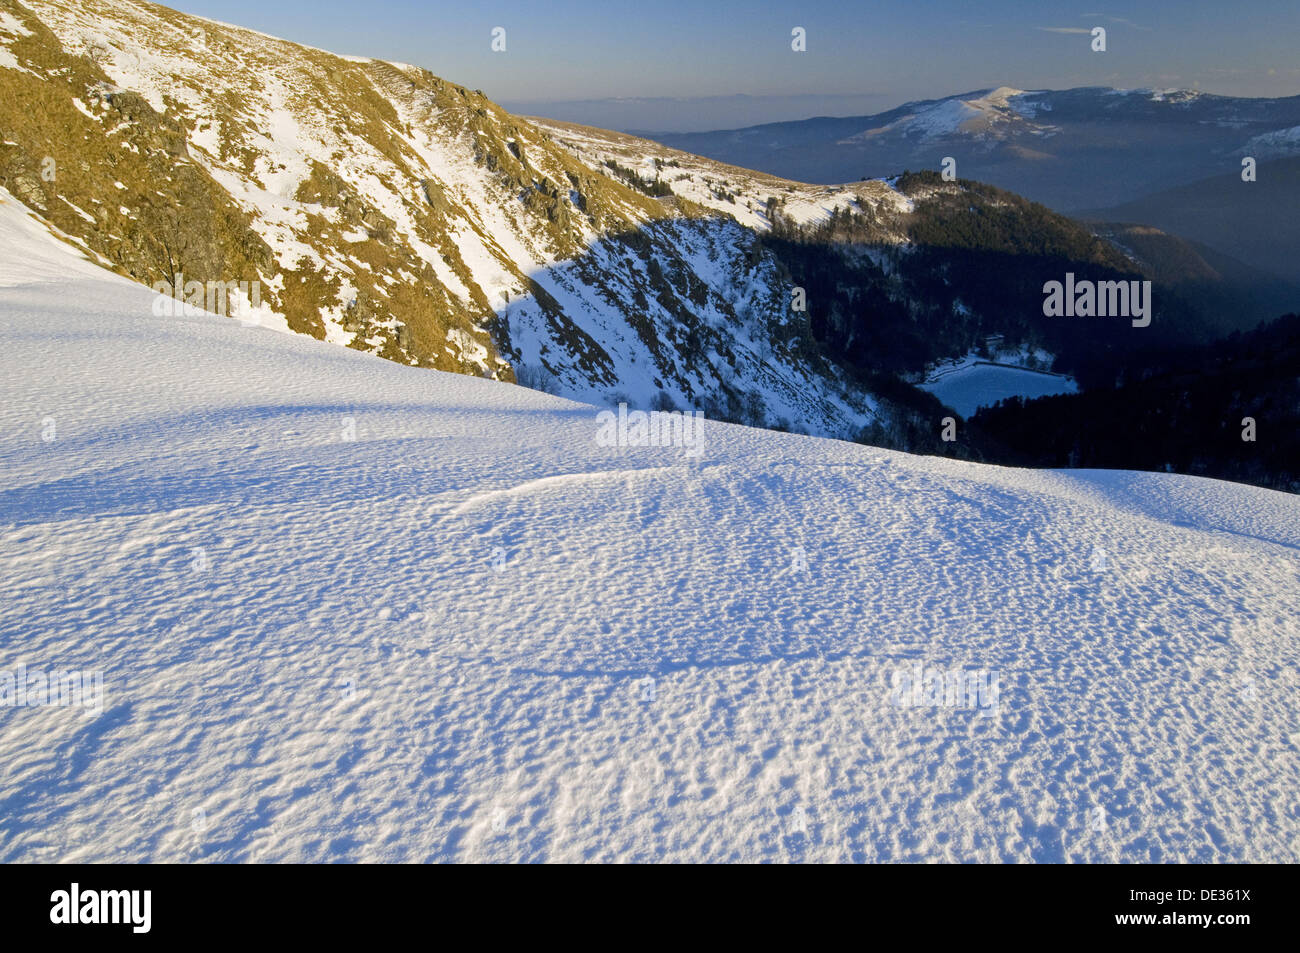 Hohneck, windswept ridge, iced snow, Vosges, lower mountain ranges, Alsace, France Stock Photo